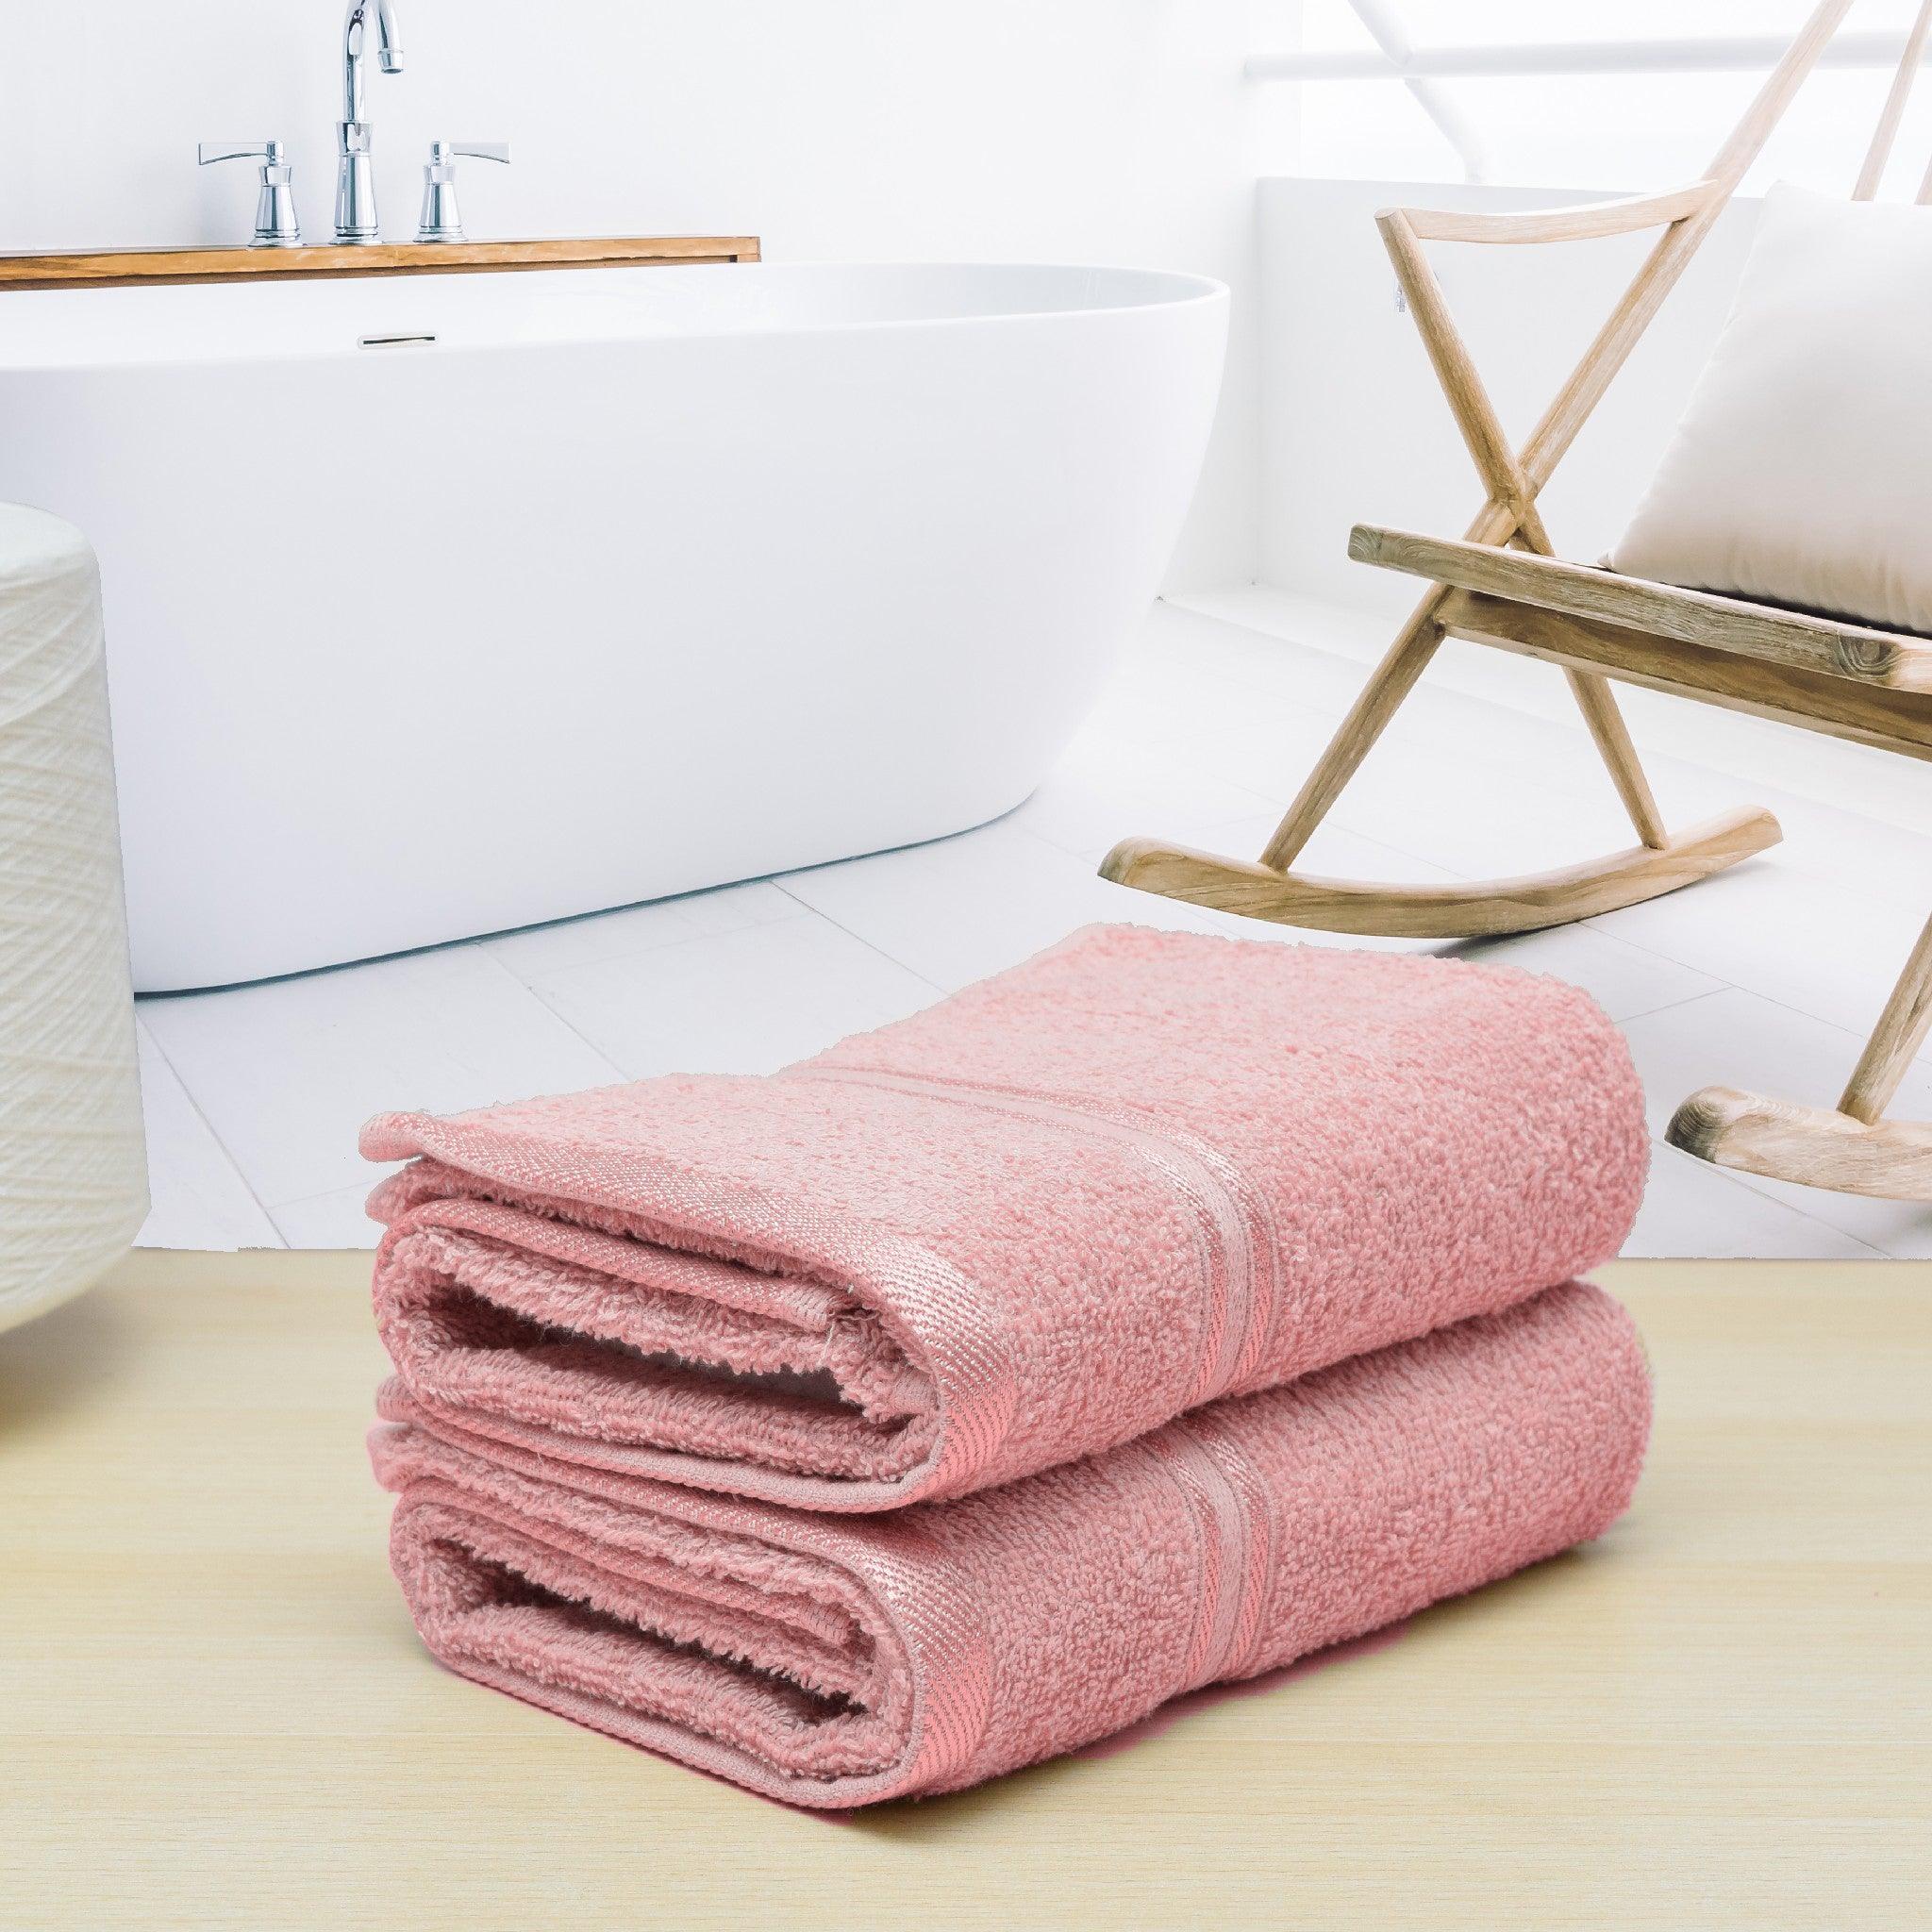 Super Comfy 100% Cotton Hand Towels | Ultra Soft, Lightweight and Quick Drying Towels